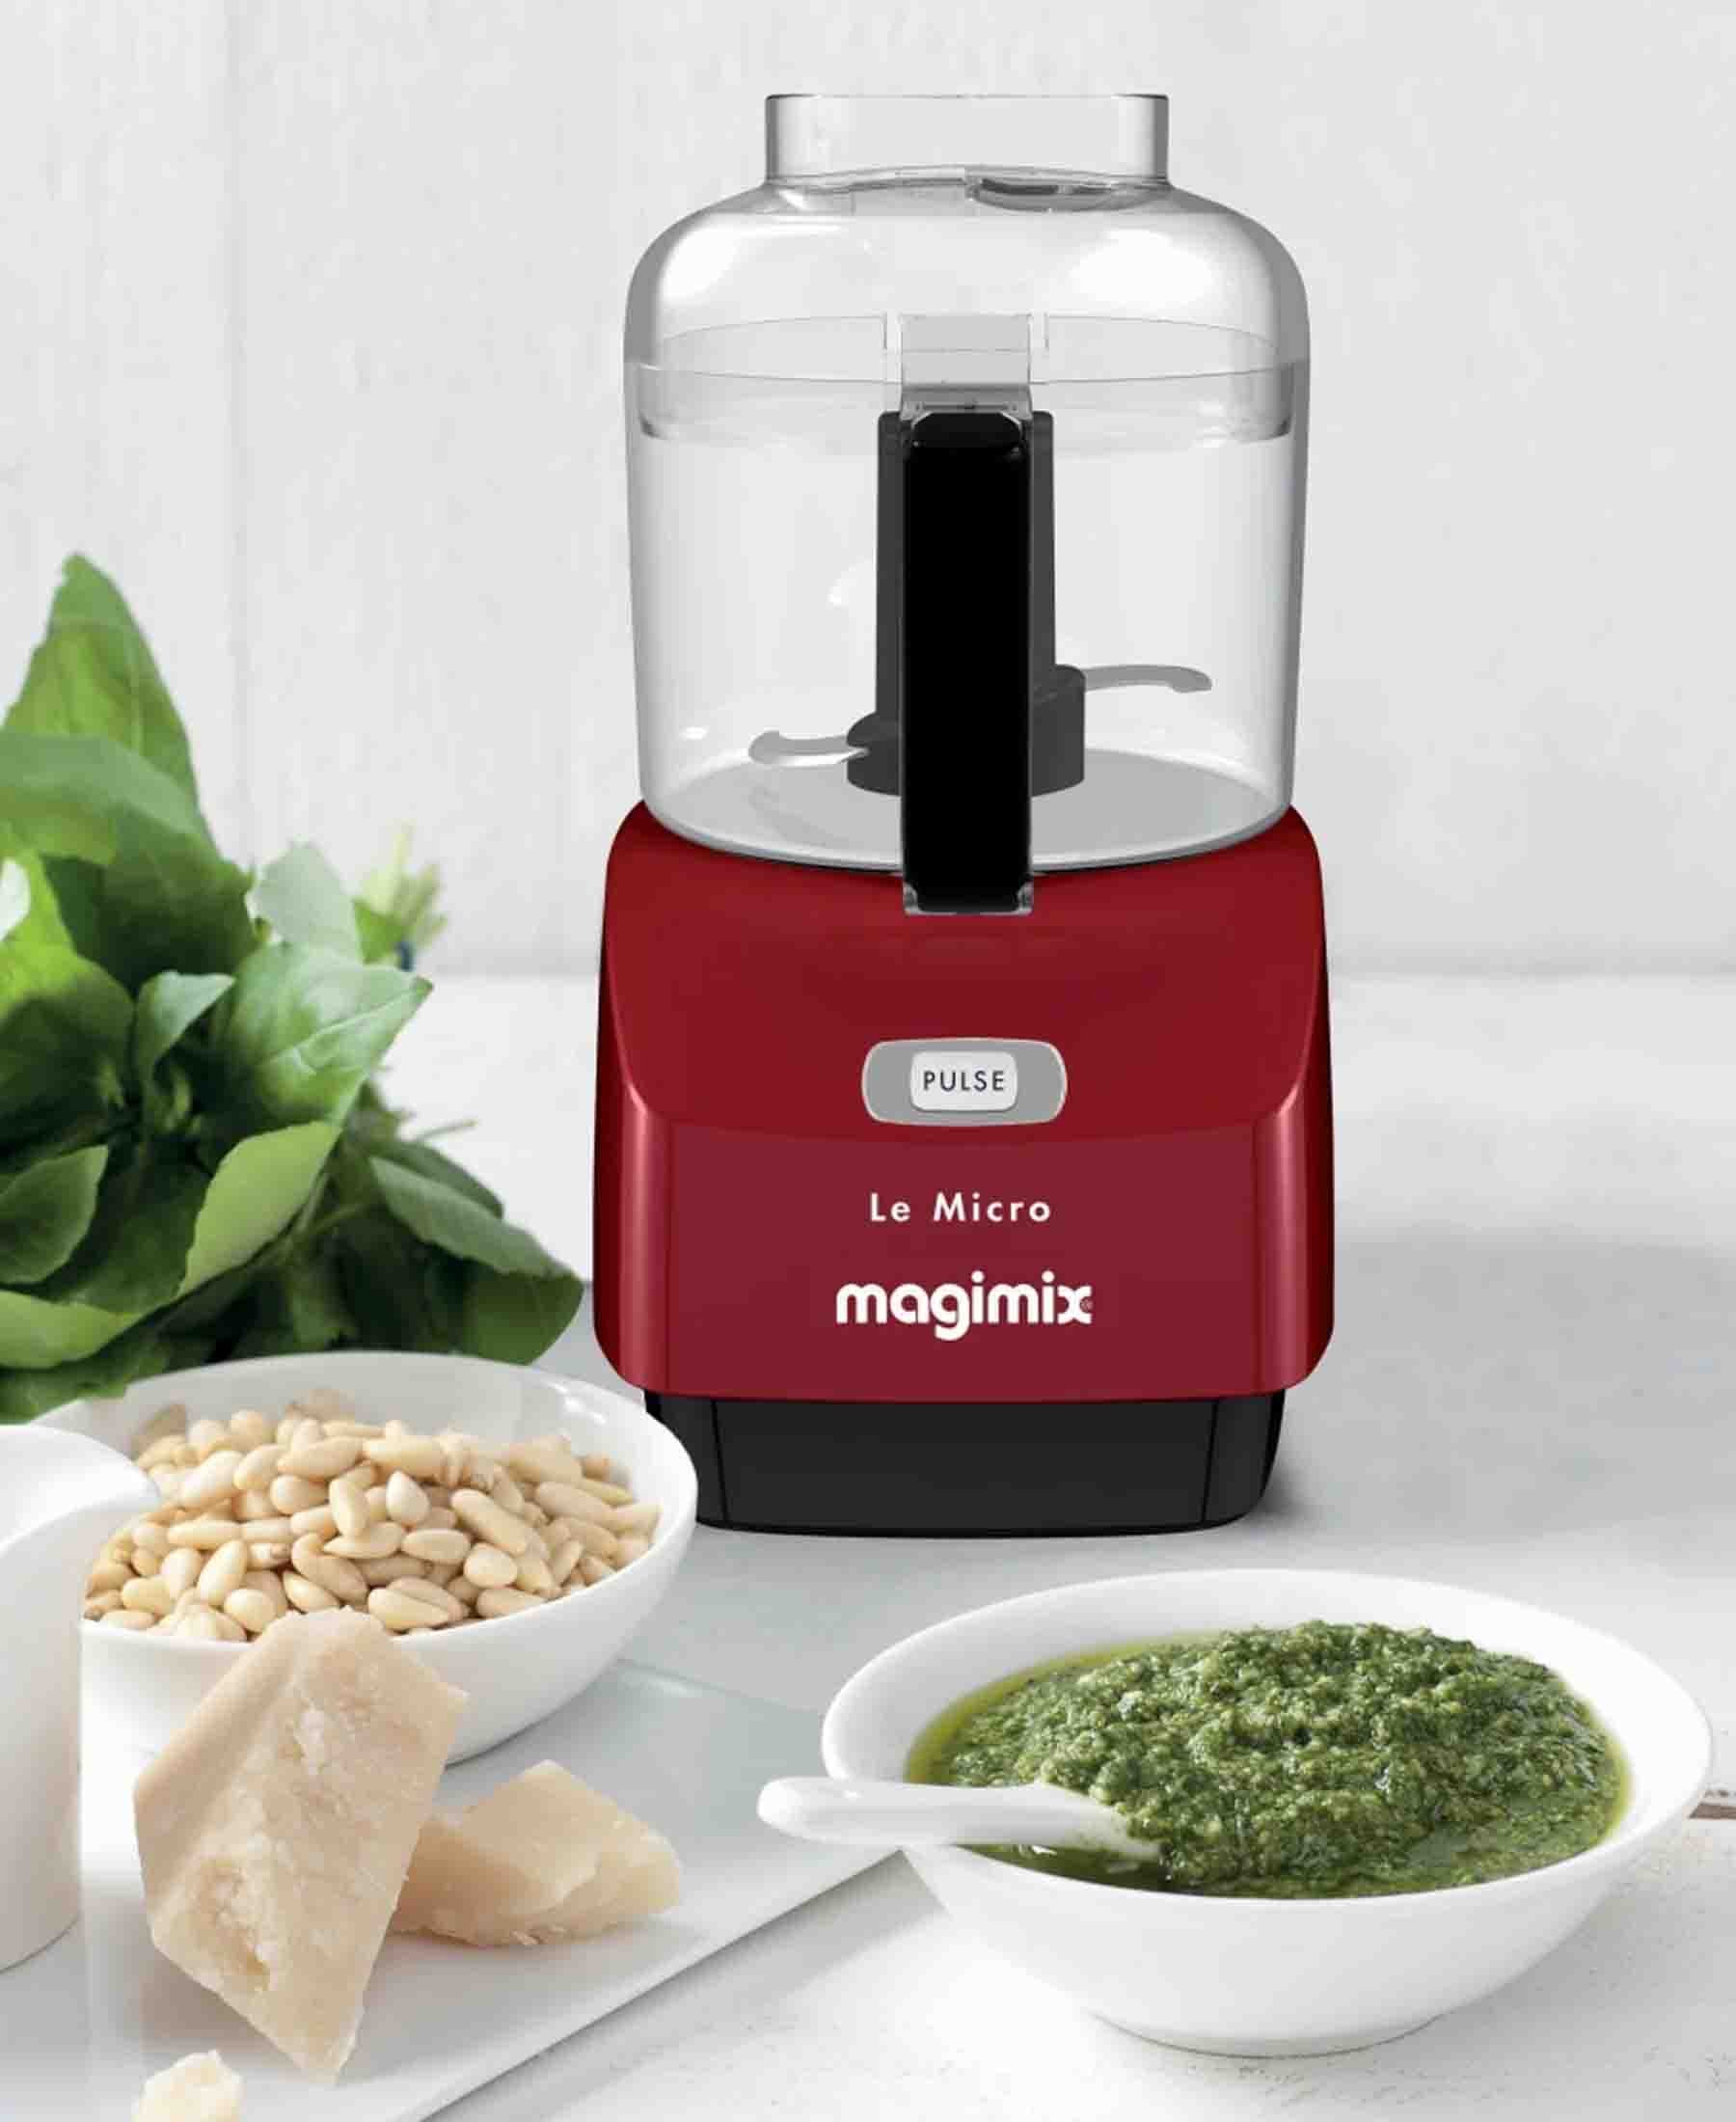 Magimix 800ML Le Micro Compact Food Processor - Red